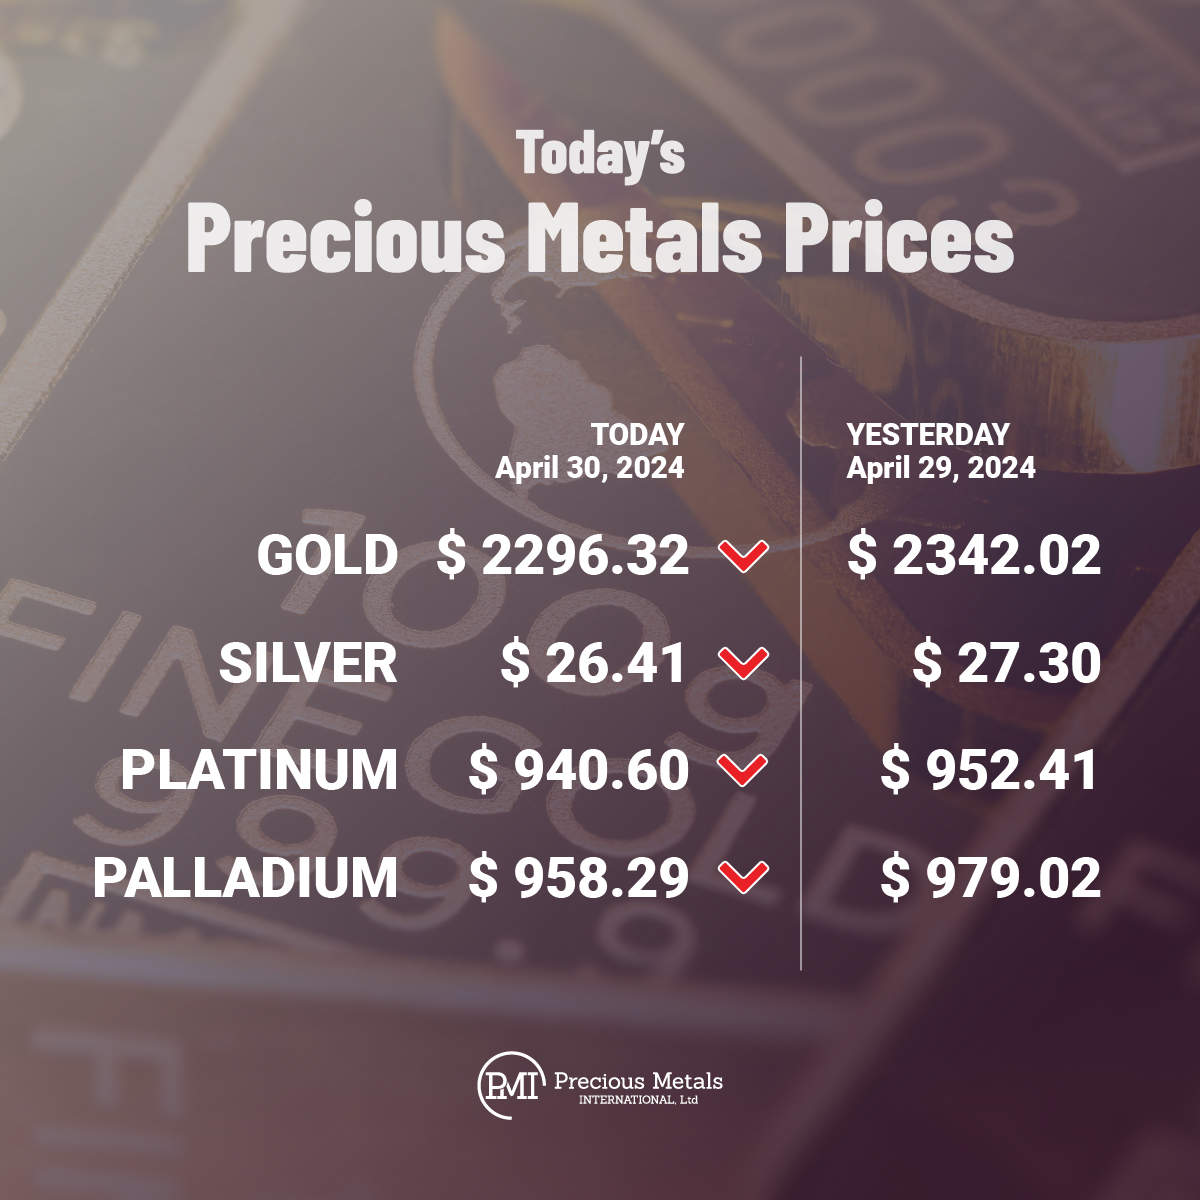 Today’s precious metals prices as of Tuesday, April 30th, 2024. · · · #BullionPMI #Gold #Silver #Platinum #Palladium #PreciousMetals #Prices #BuyGold #BuySilver #InGoldWeTrust 🥇💛🟡🌕🟨🪙⬜️🔘◻️📈✨🤯👍🏼🔥